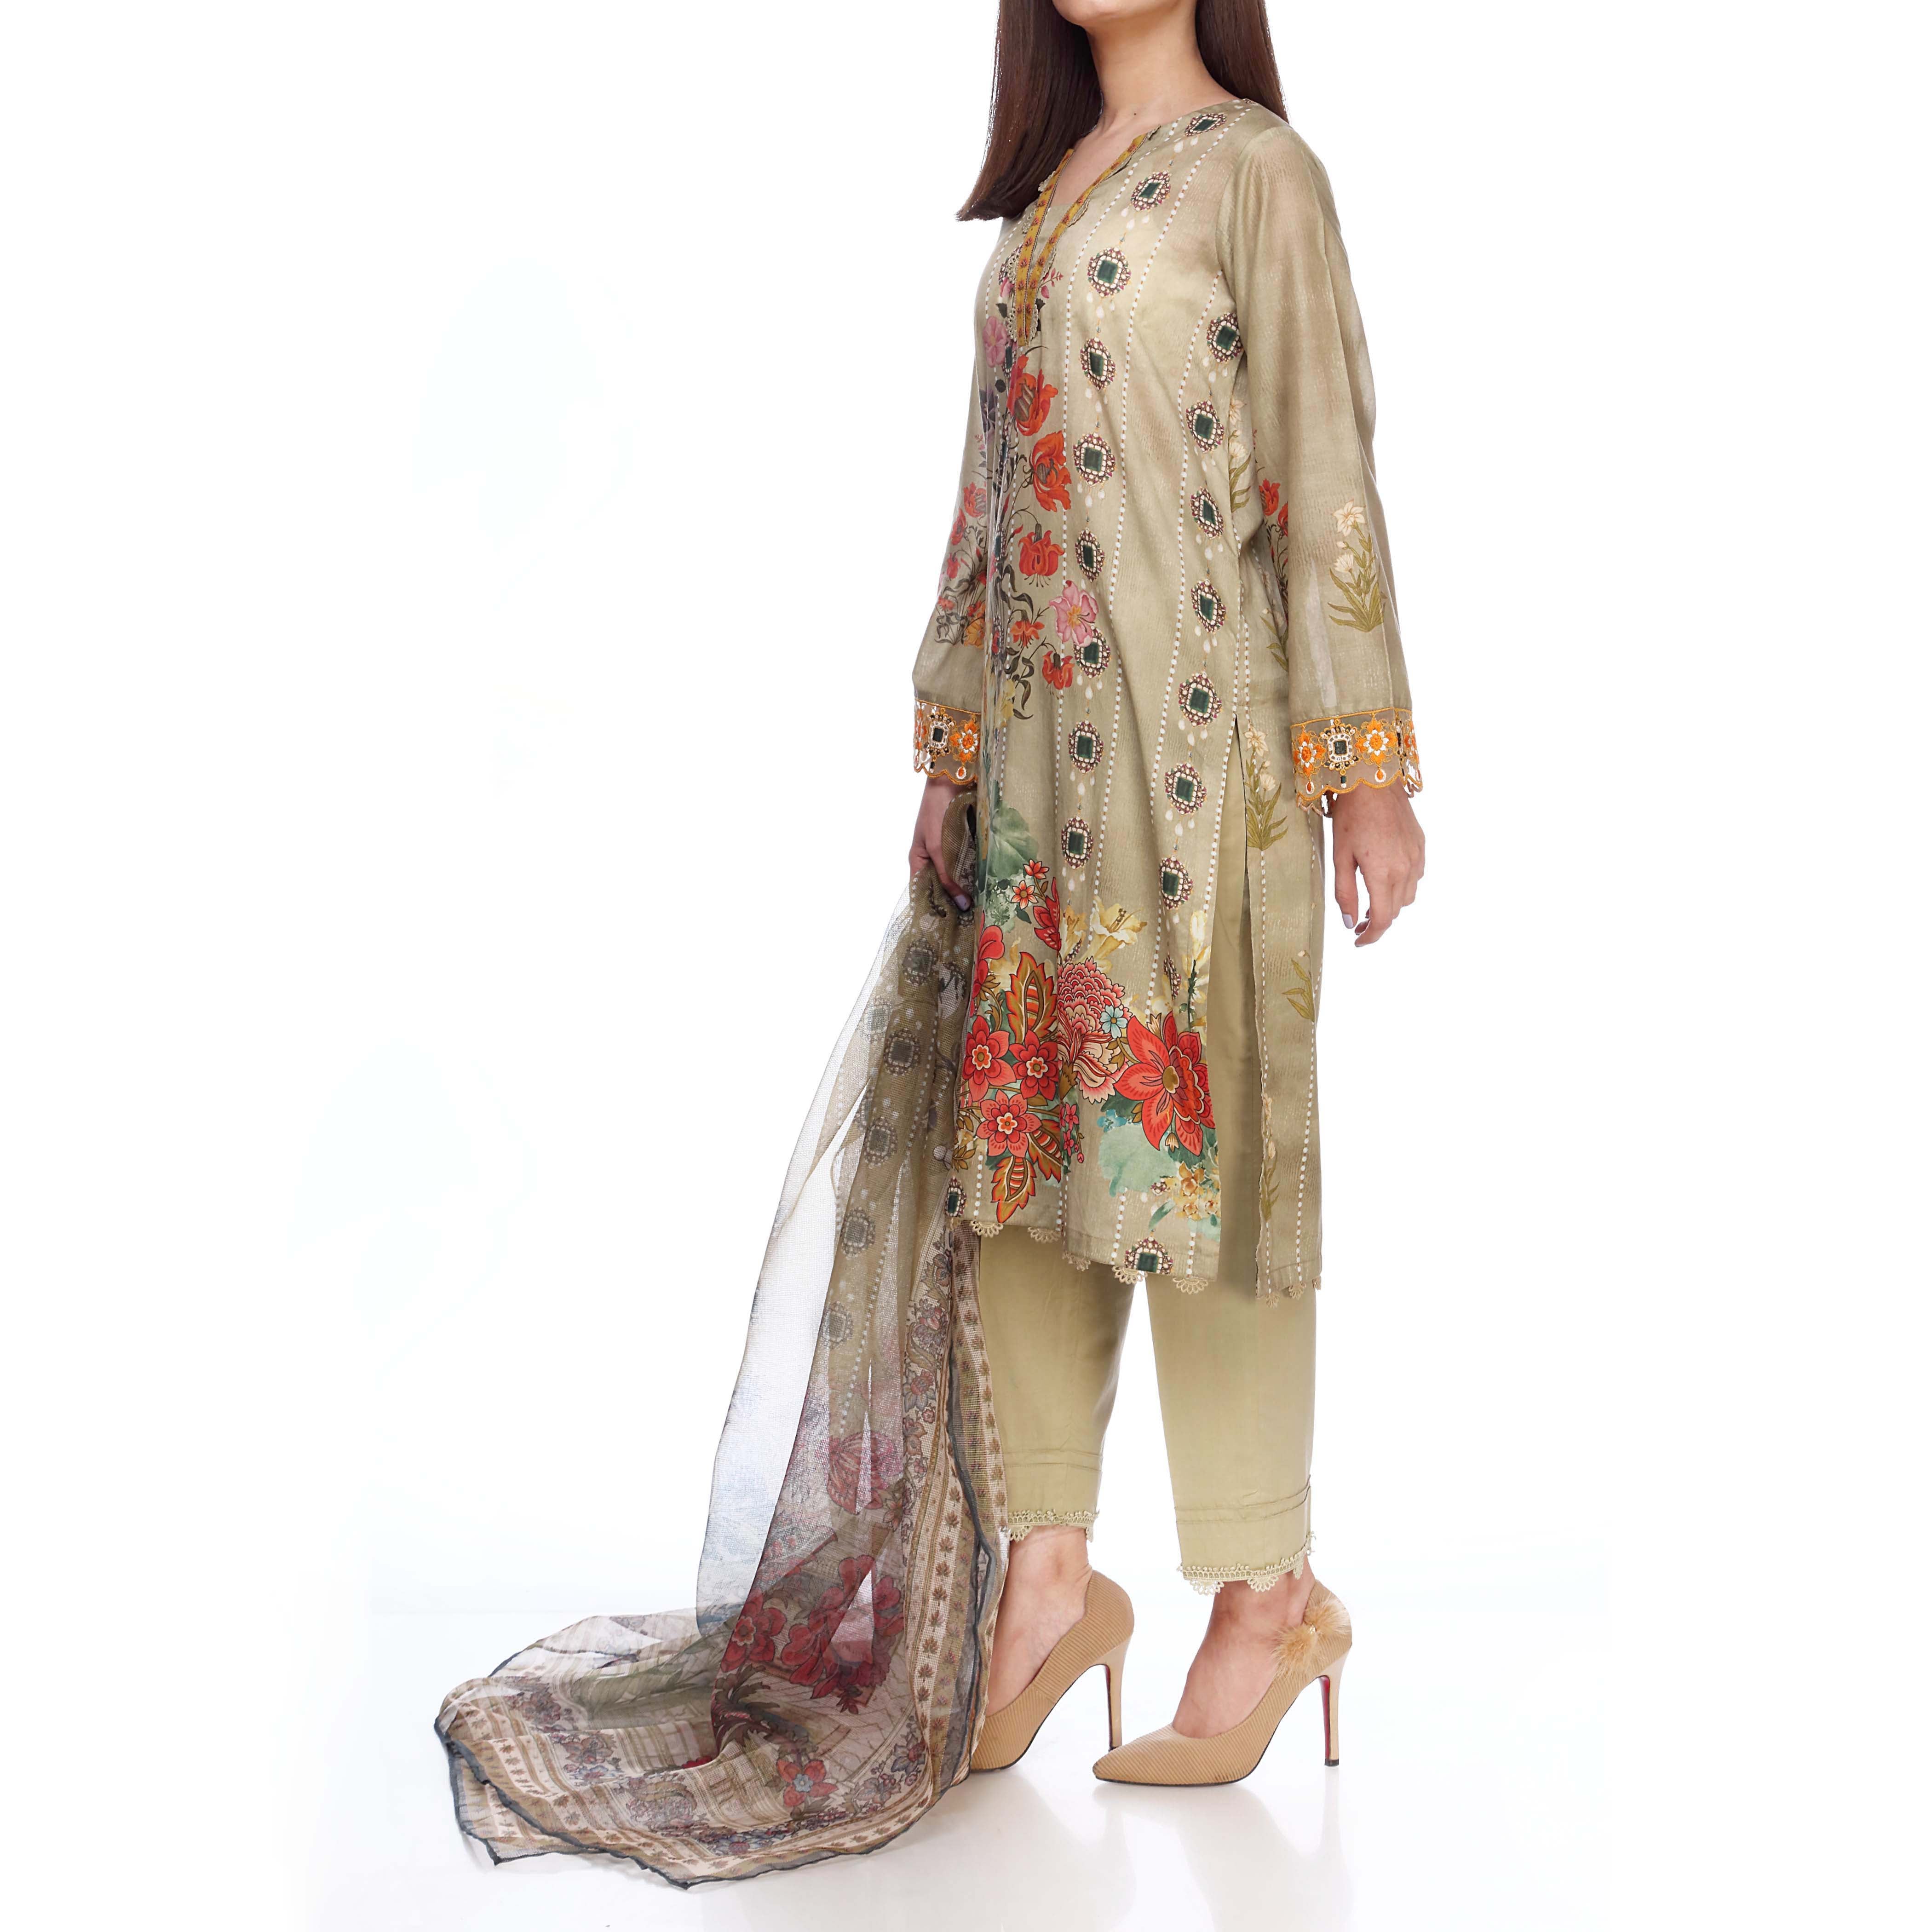 Digital Printed Lawn Shirt With Embroidered Sleeves
Digital Printed Net Dupatta
Plain Dyed Cambric Trousers